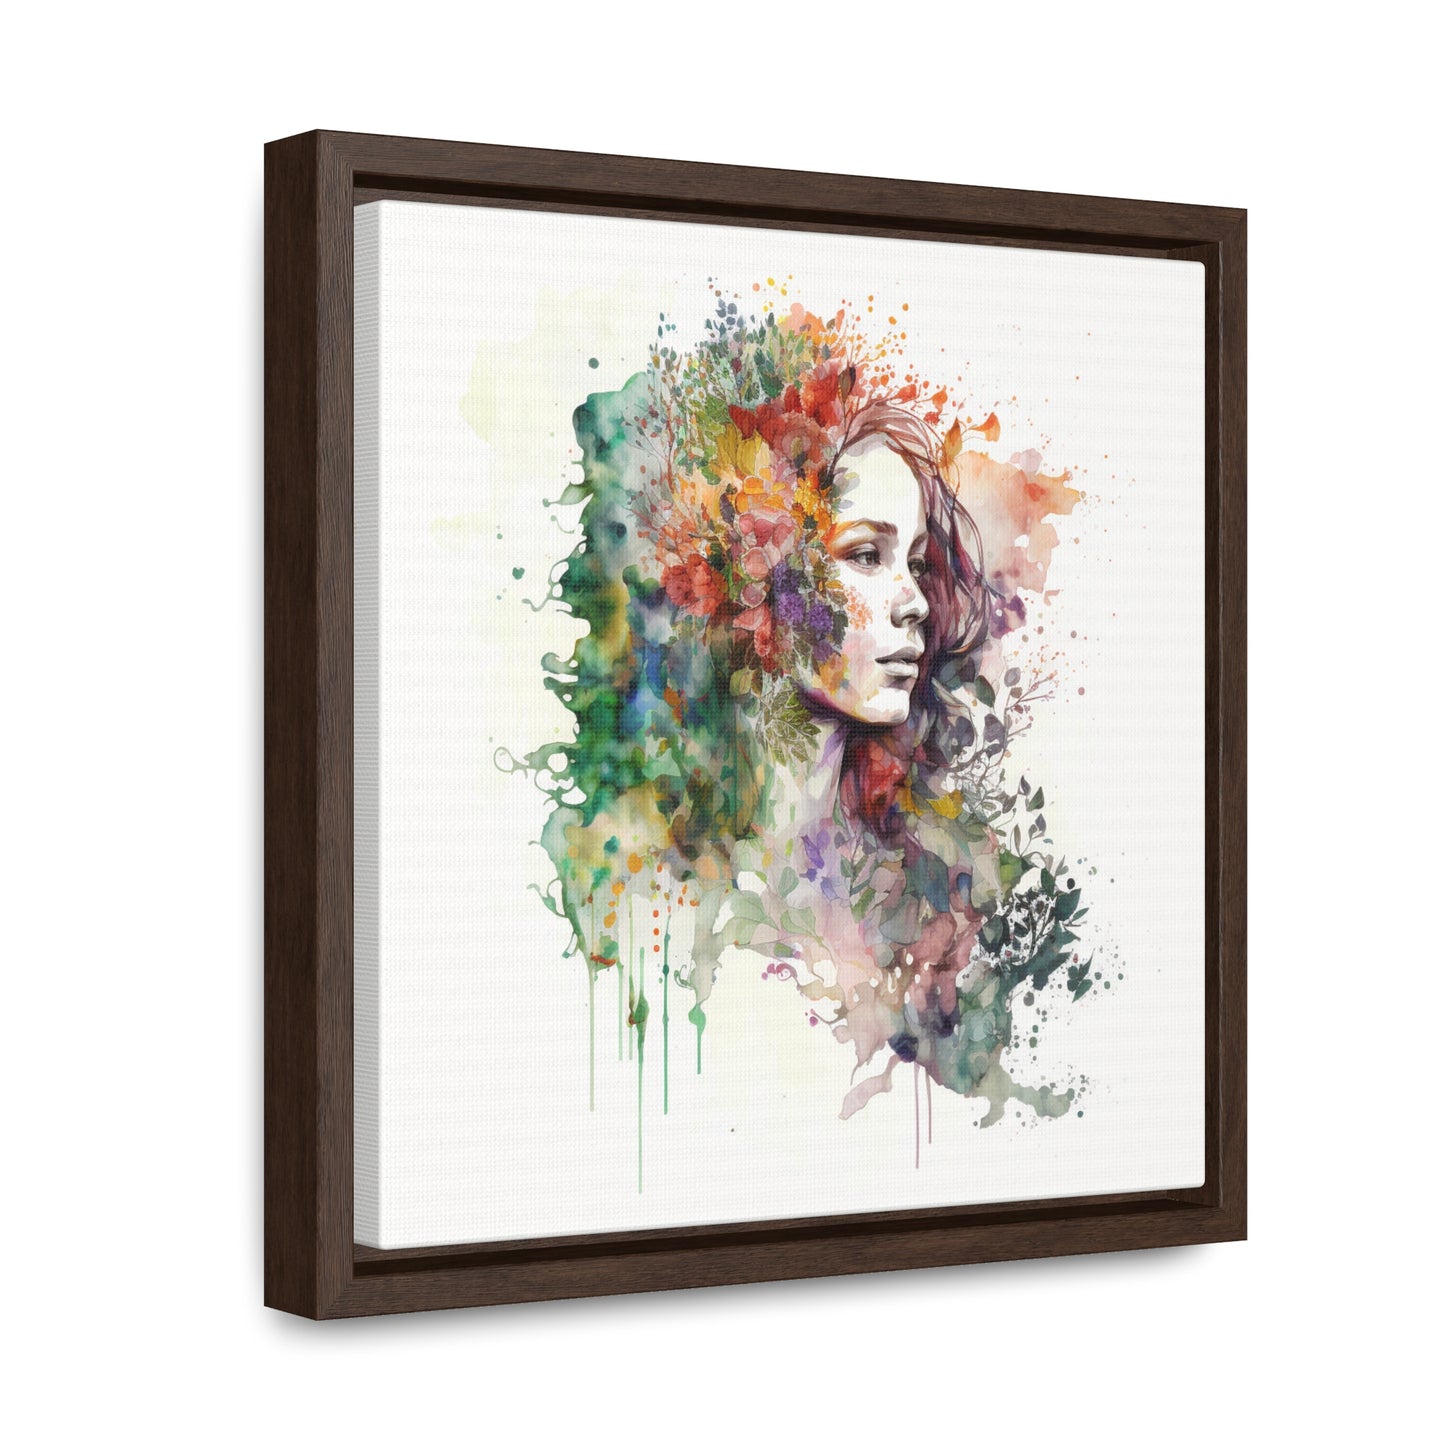 Gallery Canvas Wraps, Square Frame Mother Nature Bright Spring Colors Realistic Watercolor 3